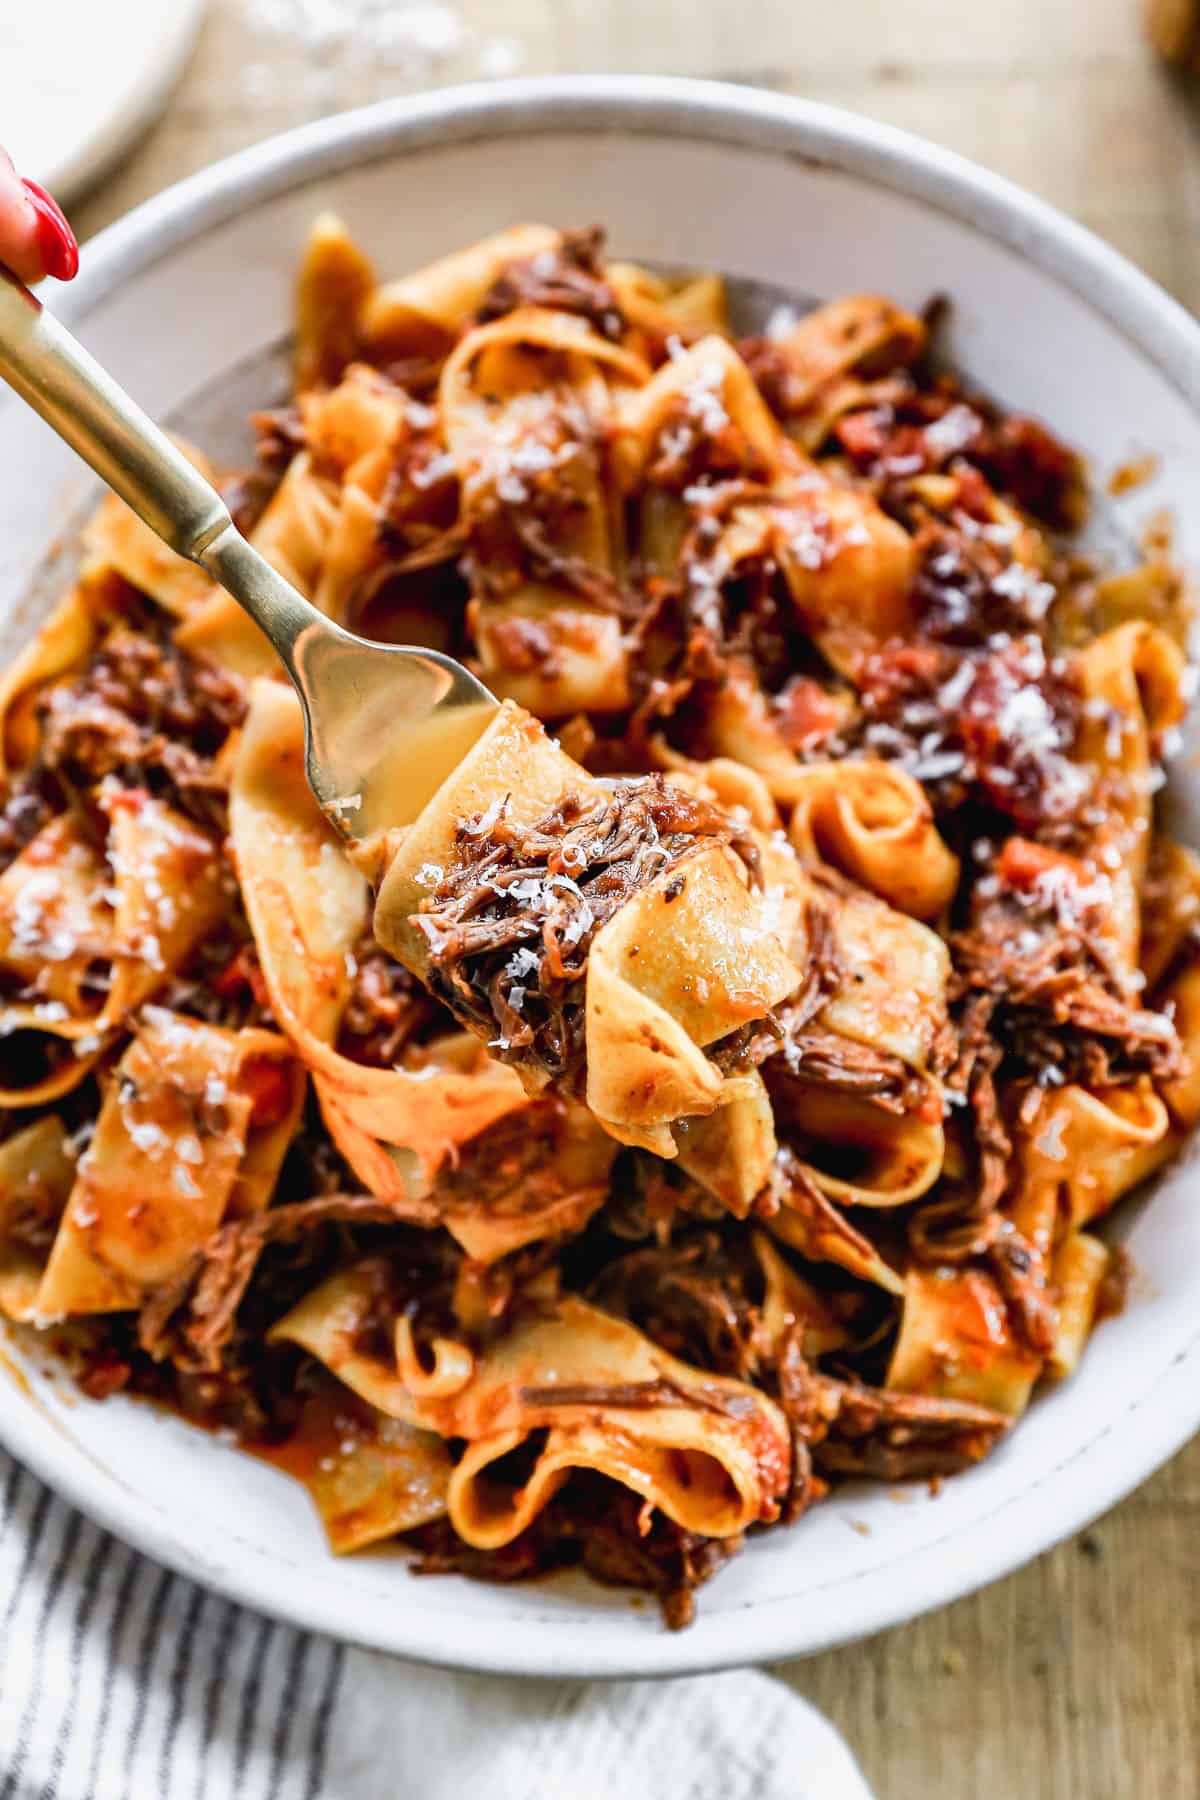 A fork lifting up a bite of the best Short Rib Ragu sprinkled with fresh parmesan cheese.